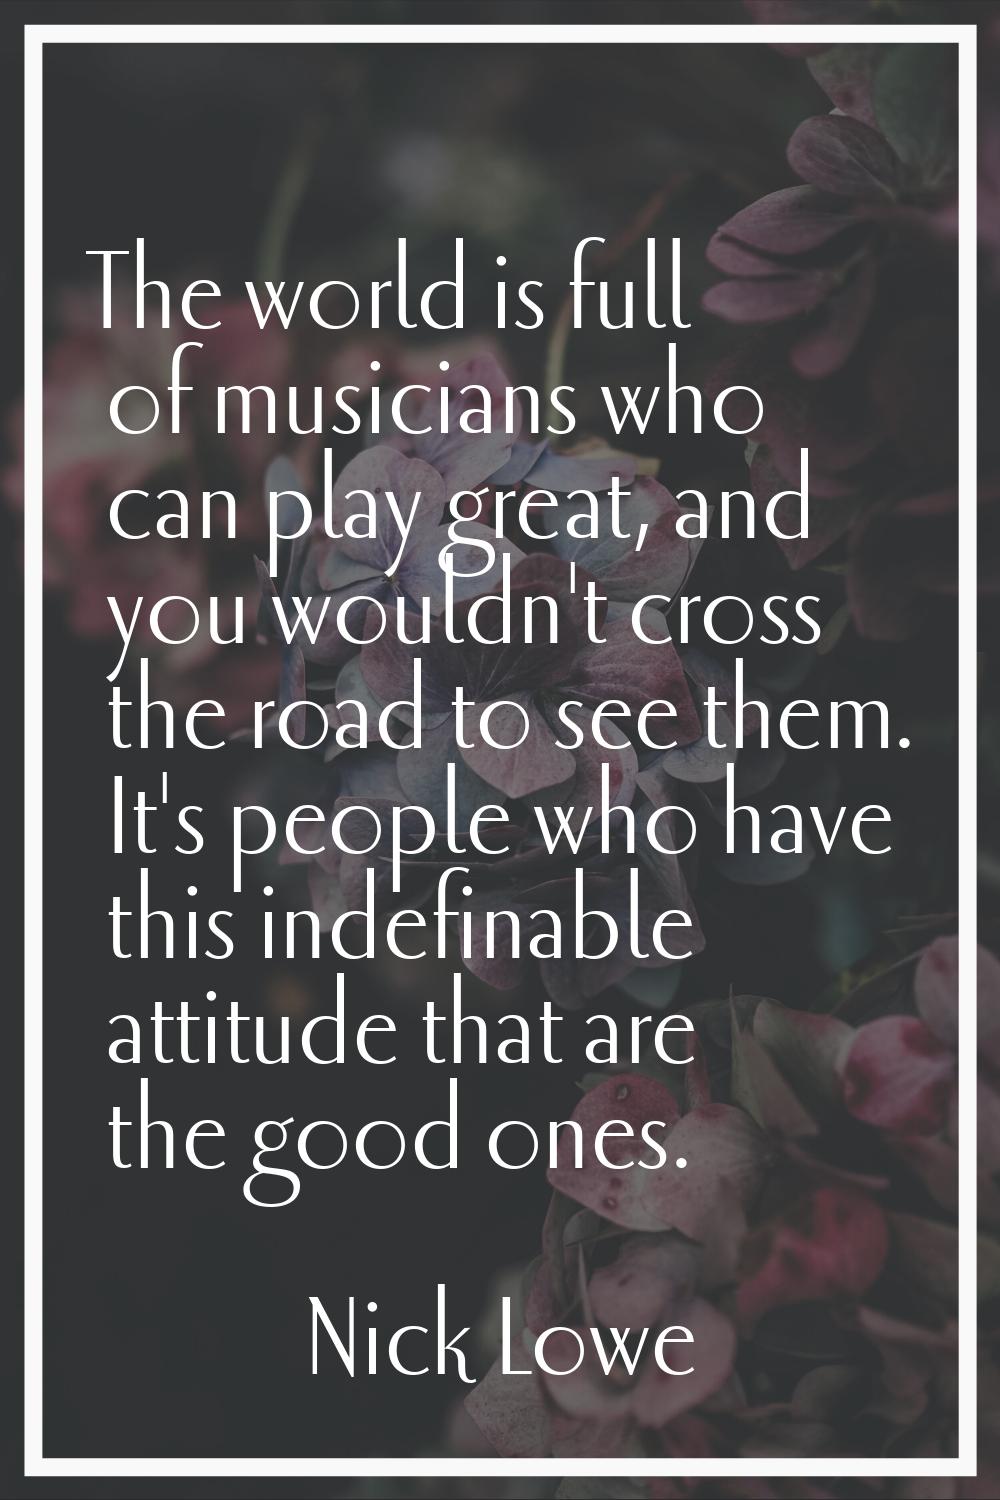 The world is full of musicians who can play great, and you wouldn't cross the road to see them. It'